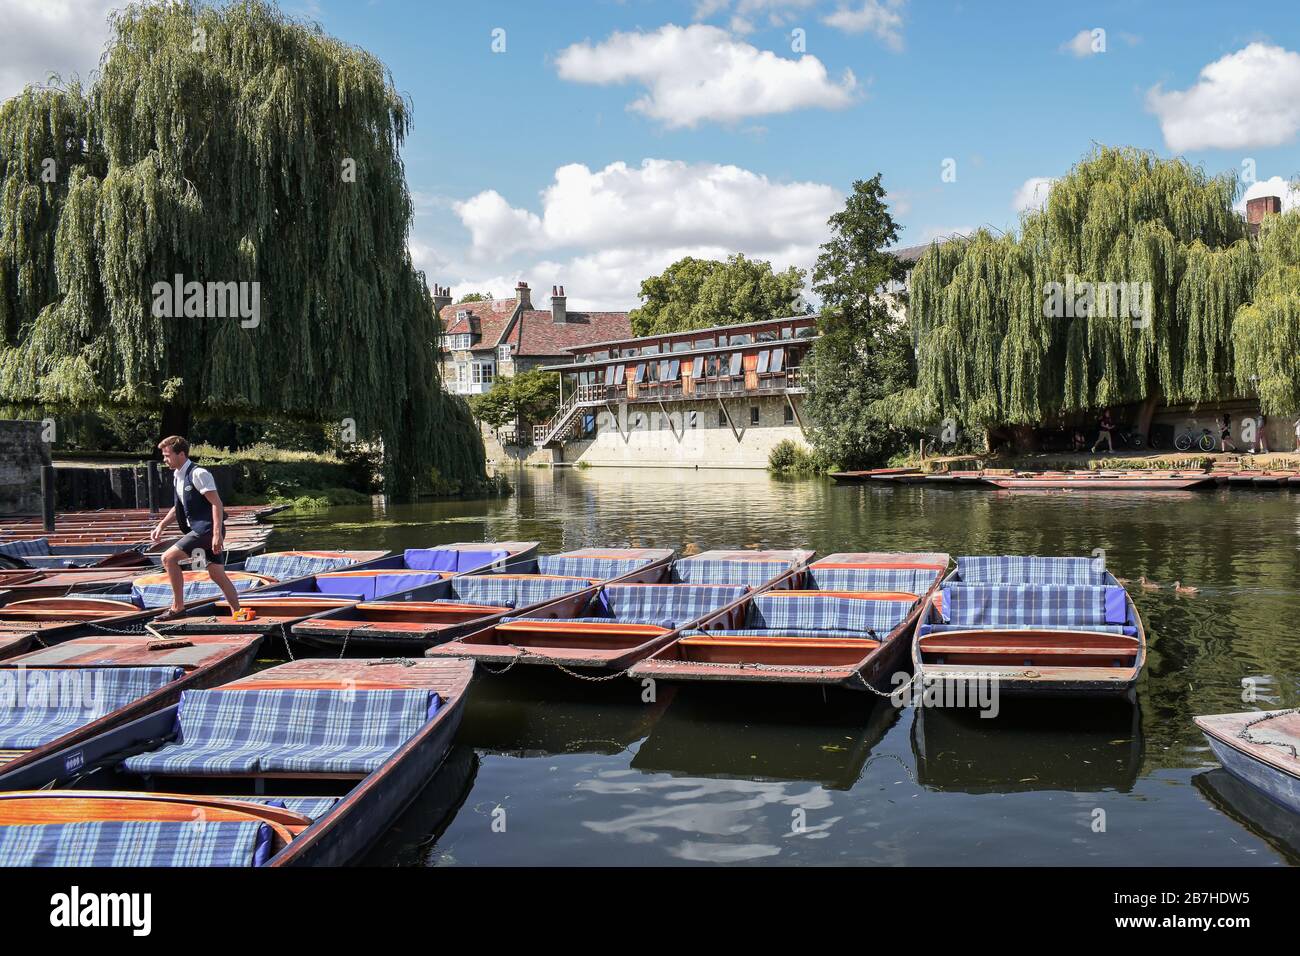 Cambridge, Cambridgeshire, United Kingdom - Tourists on punt trip (sightseeing with boat) along River Cam in the city of Cambridge, Unite Stock Photo